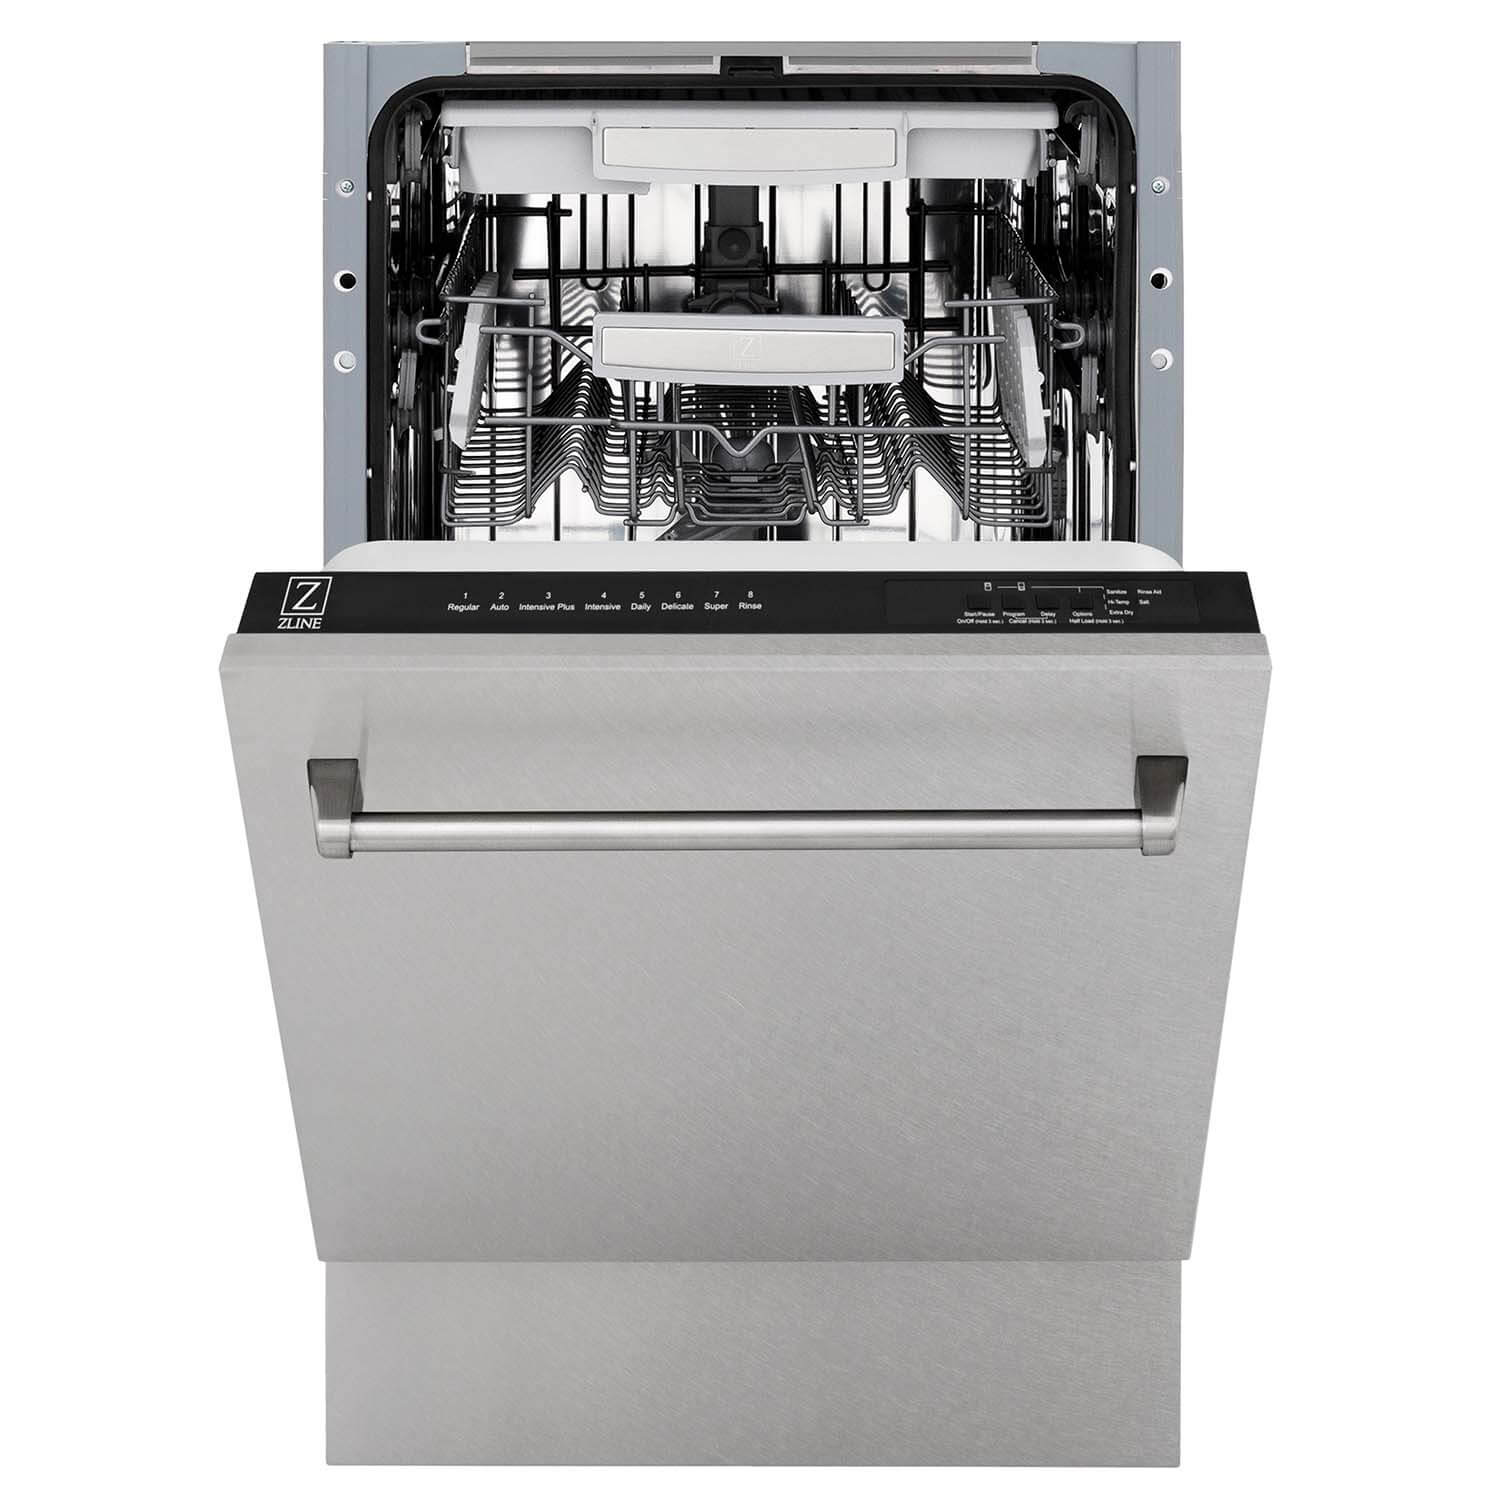 ZLINE 18 in. Tallac Series 3rd Rack Top Control Dishwasher in Fingerprint Resistant with Stainless Steel Tub, 51dBa (DWV-SN-18) front, half open.